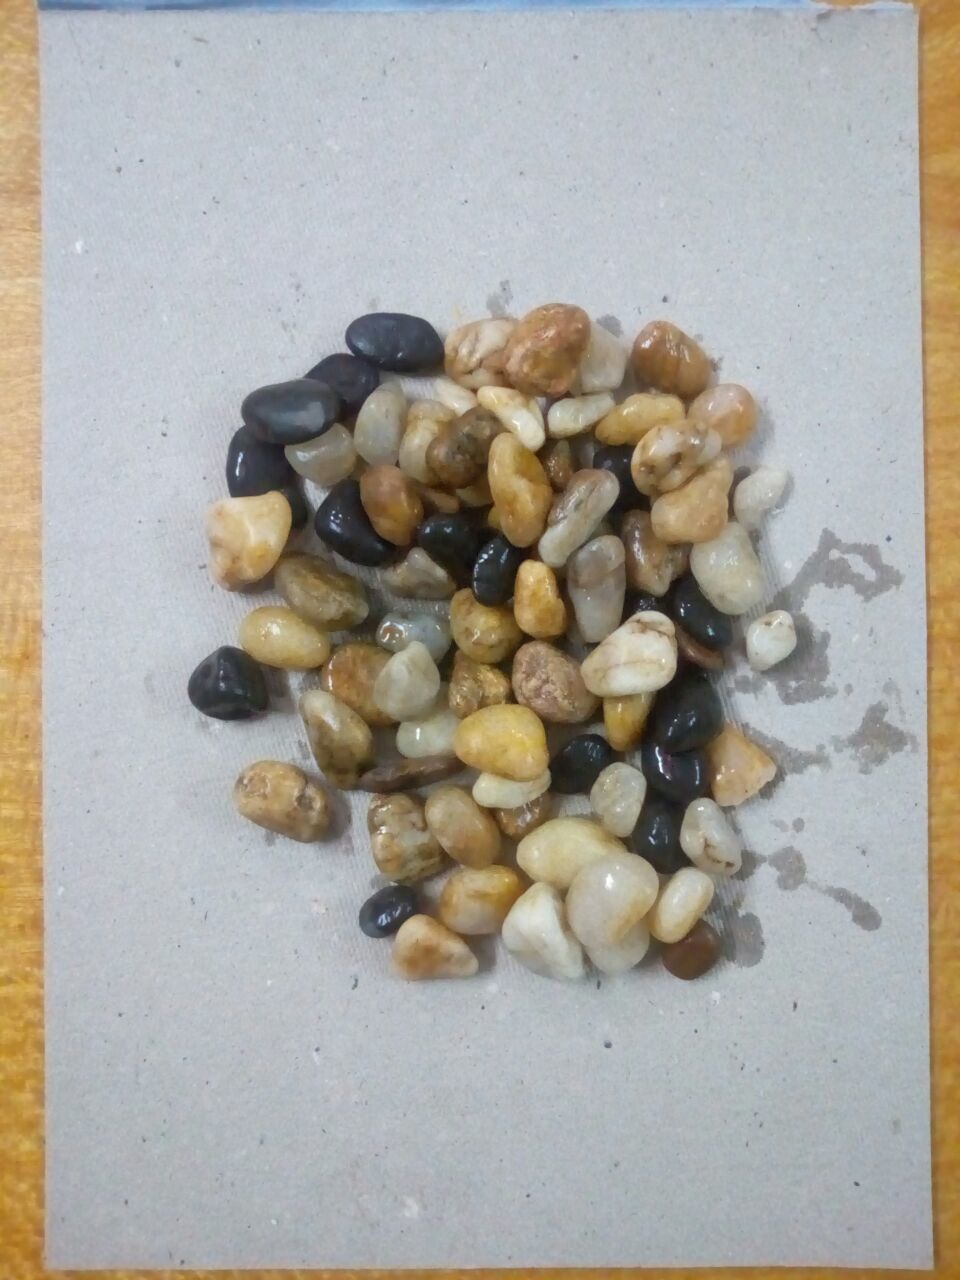 Natural Mix Gravels And Pebbles Wash For Landscape Flooring Wall Cladding